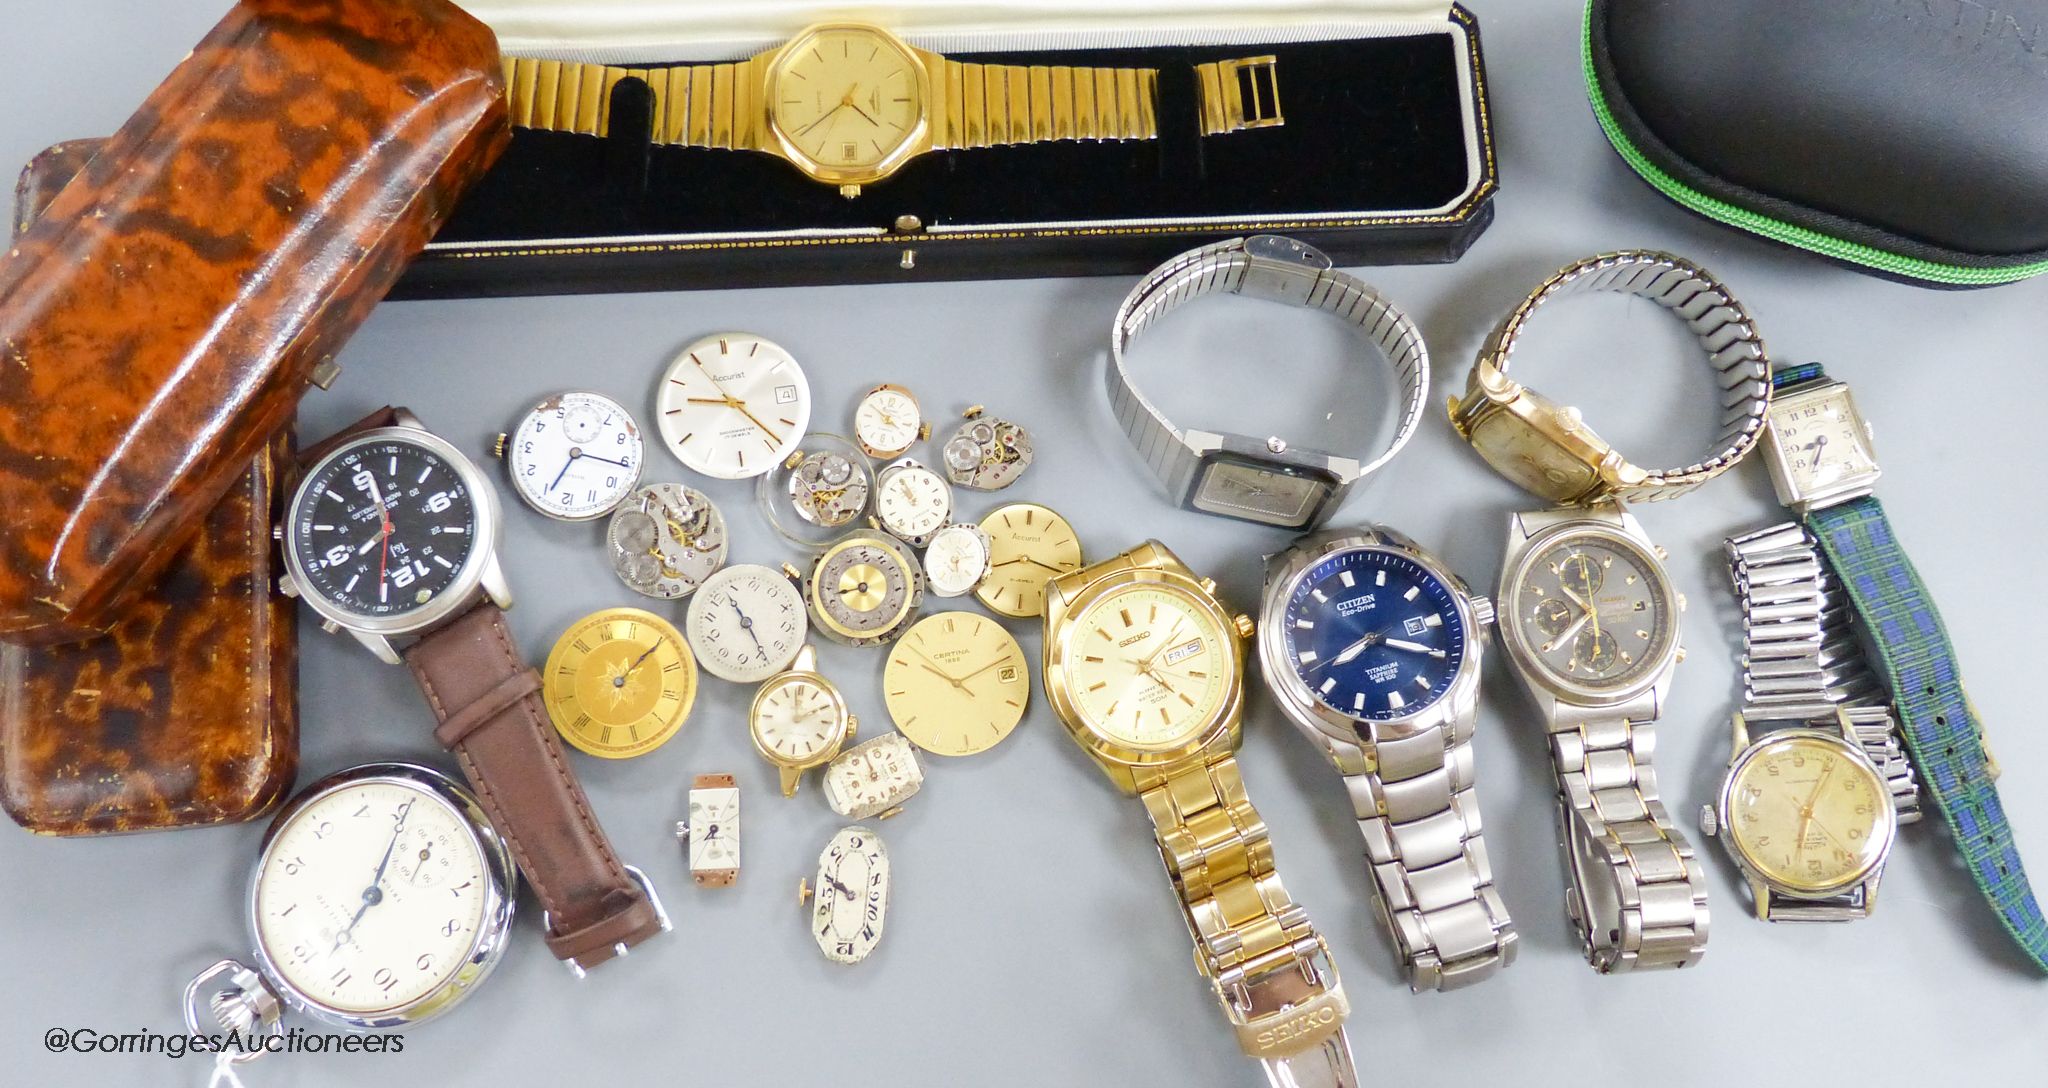 A small collection of wrist watches etc. including Longines, Certina and Rado and a small collection of watch movements.